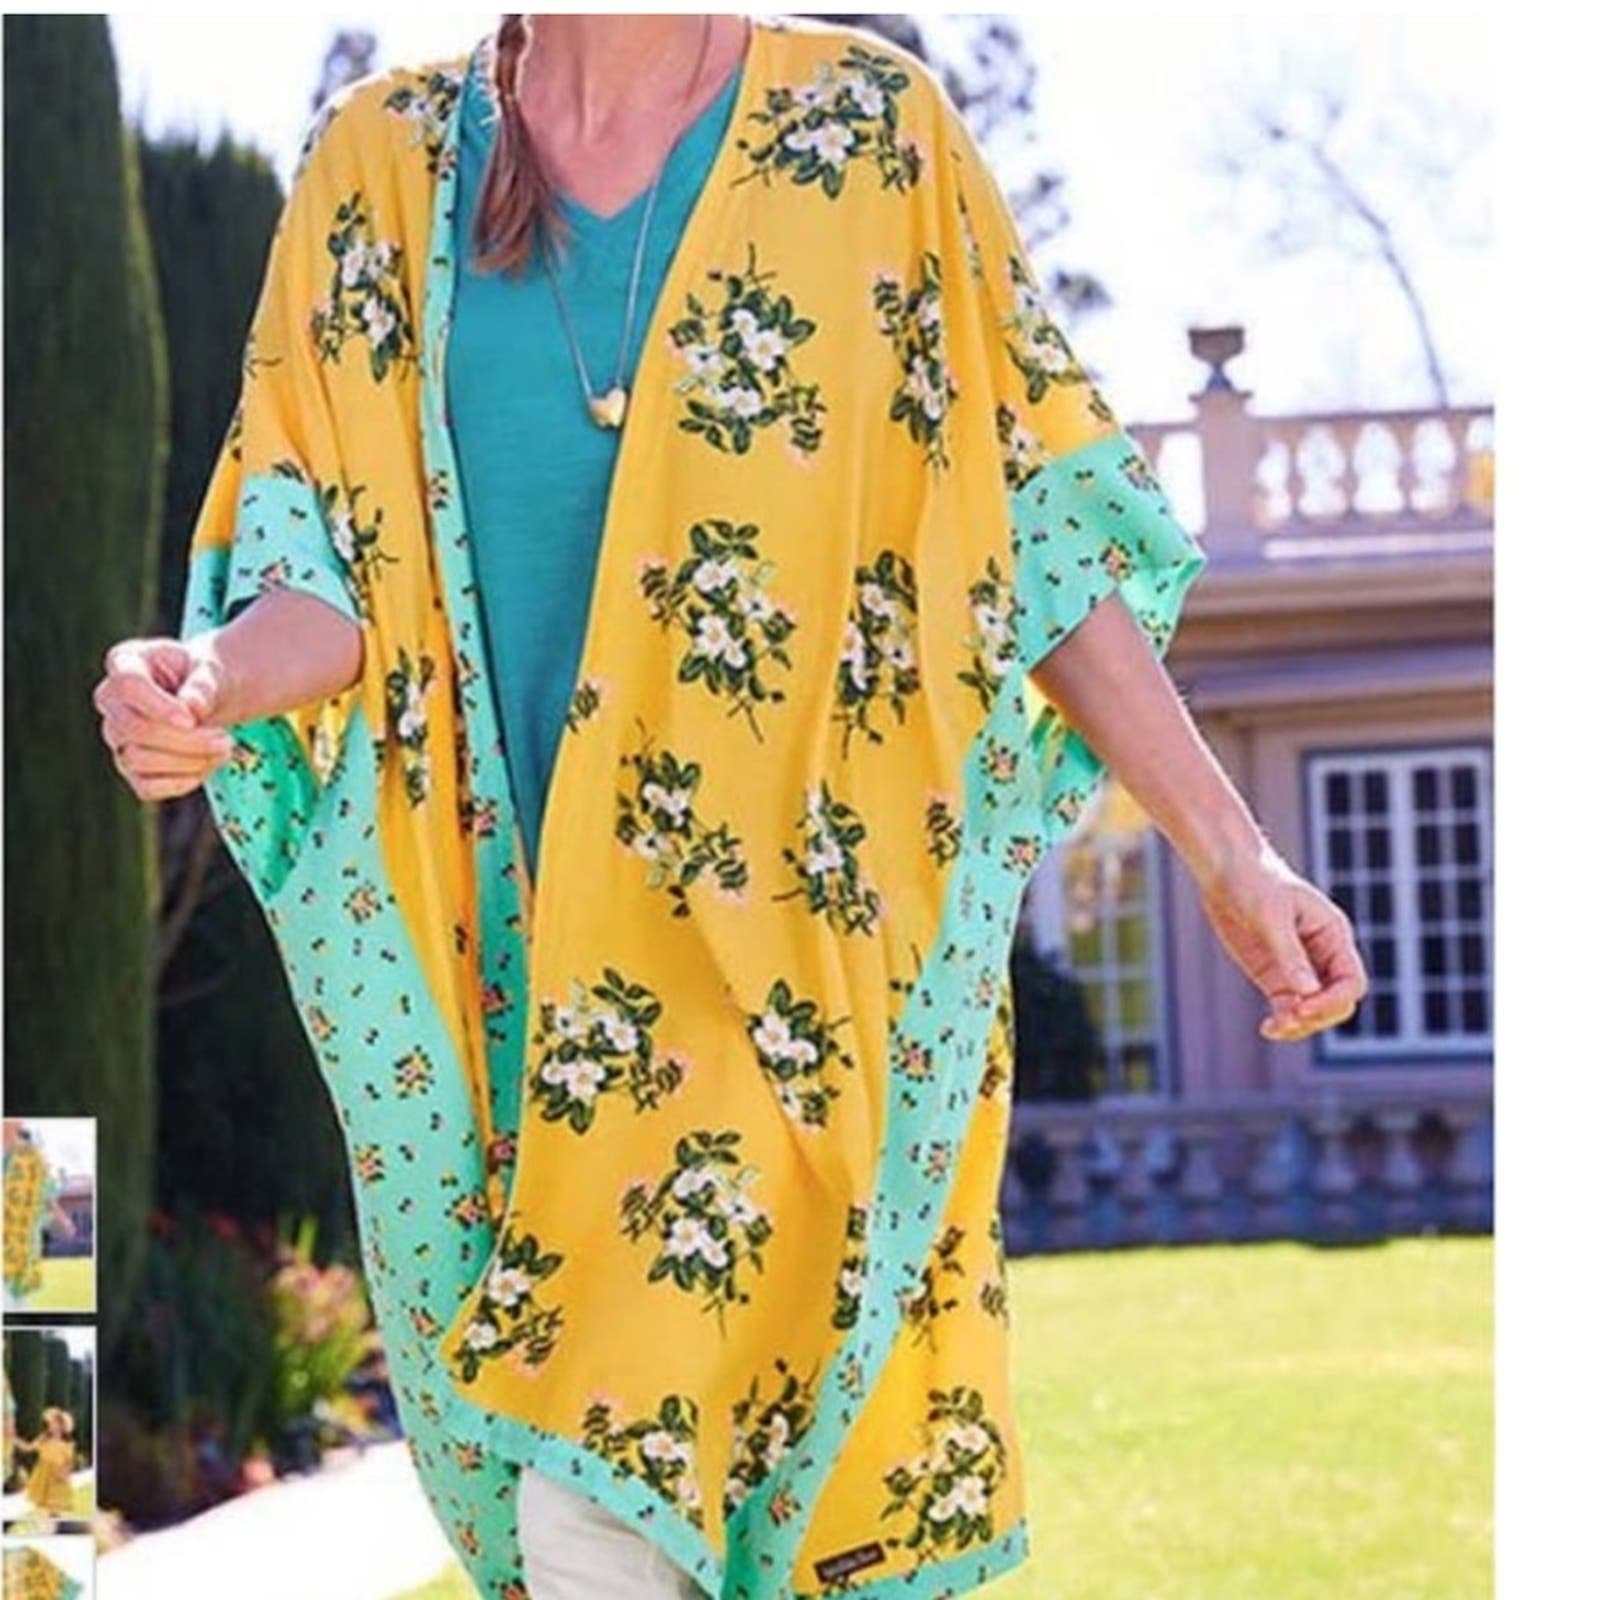 Cheap Matilda Jane Yellow Floral What a Catch Oversized